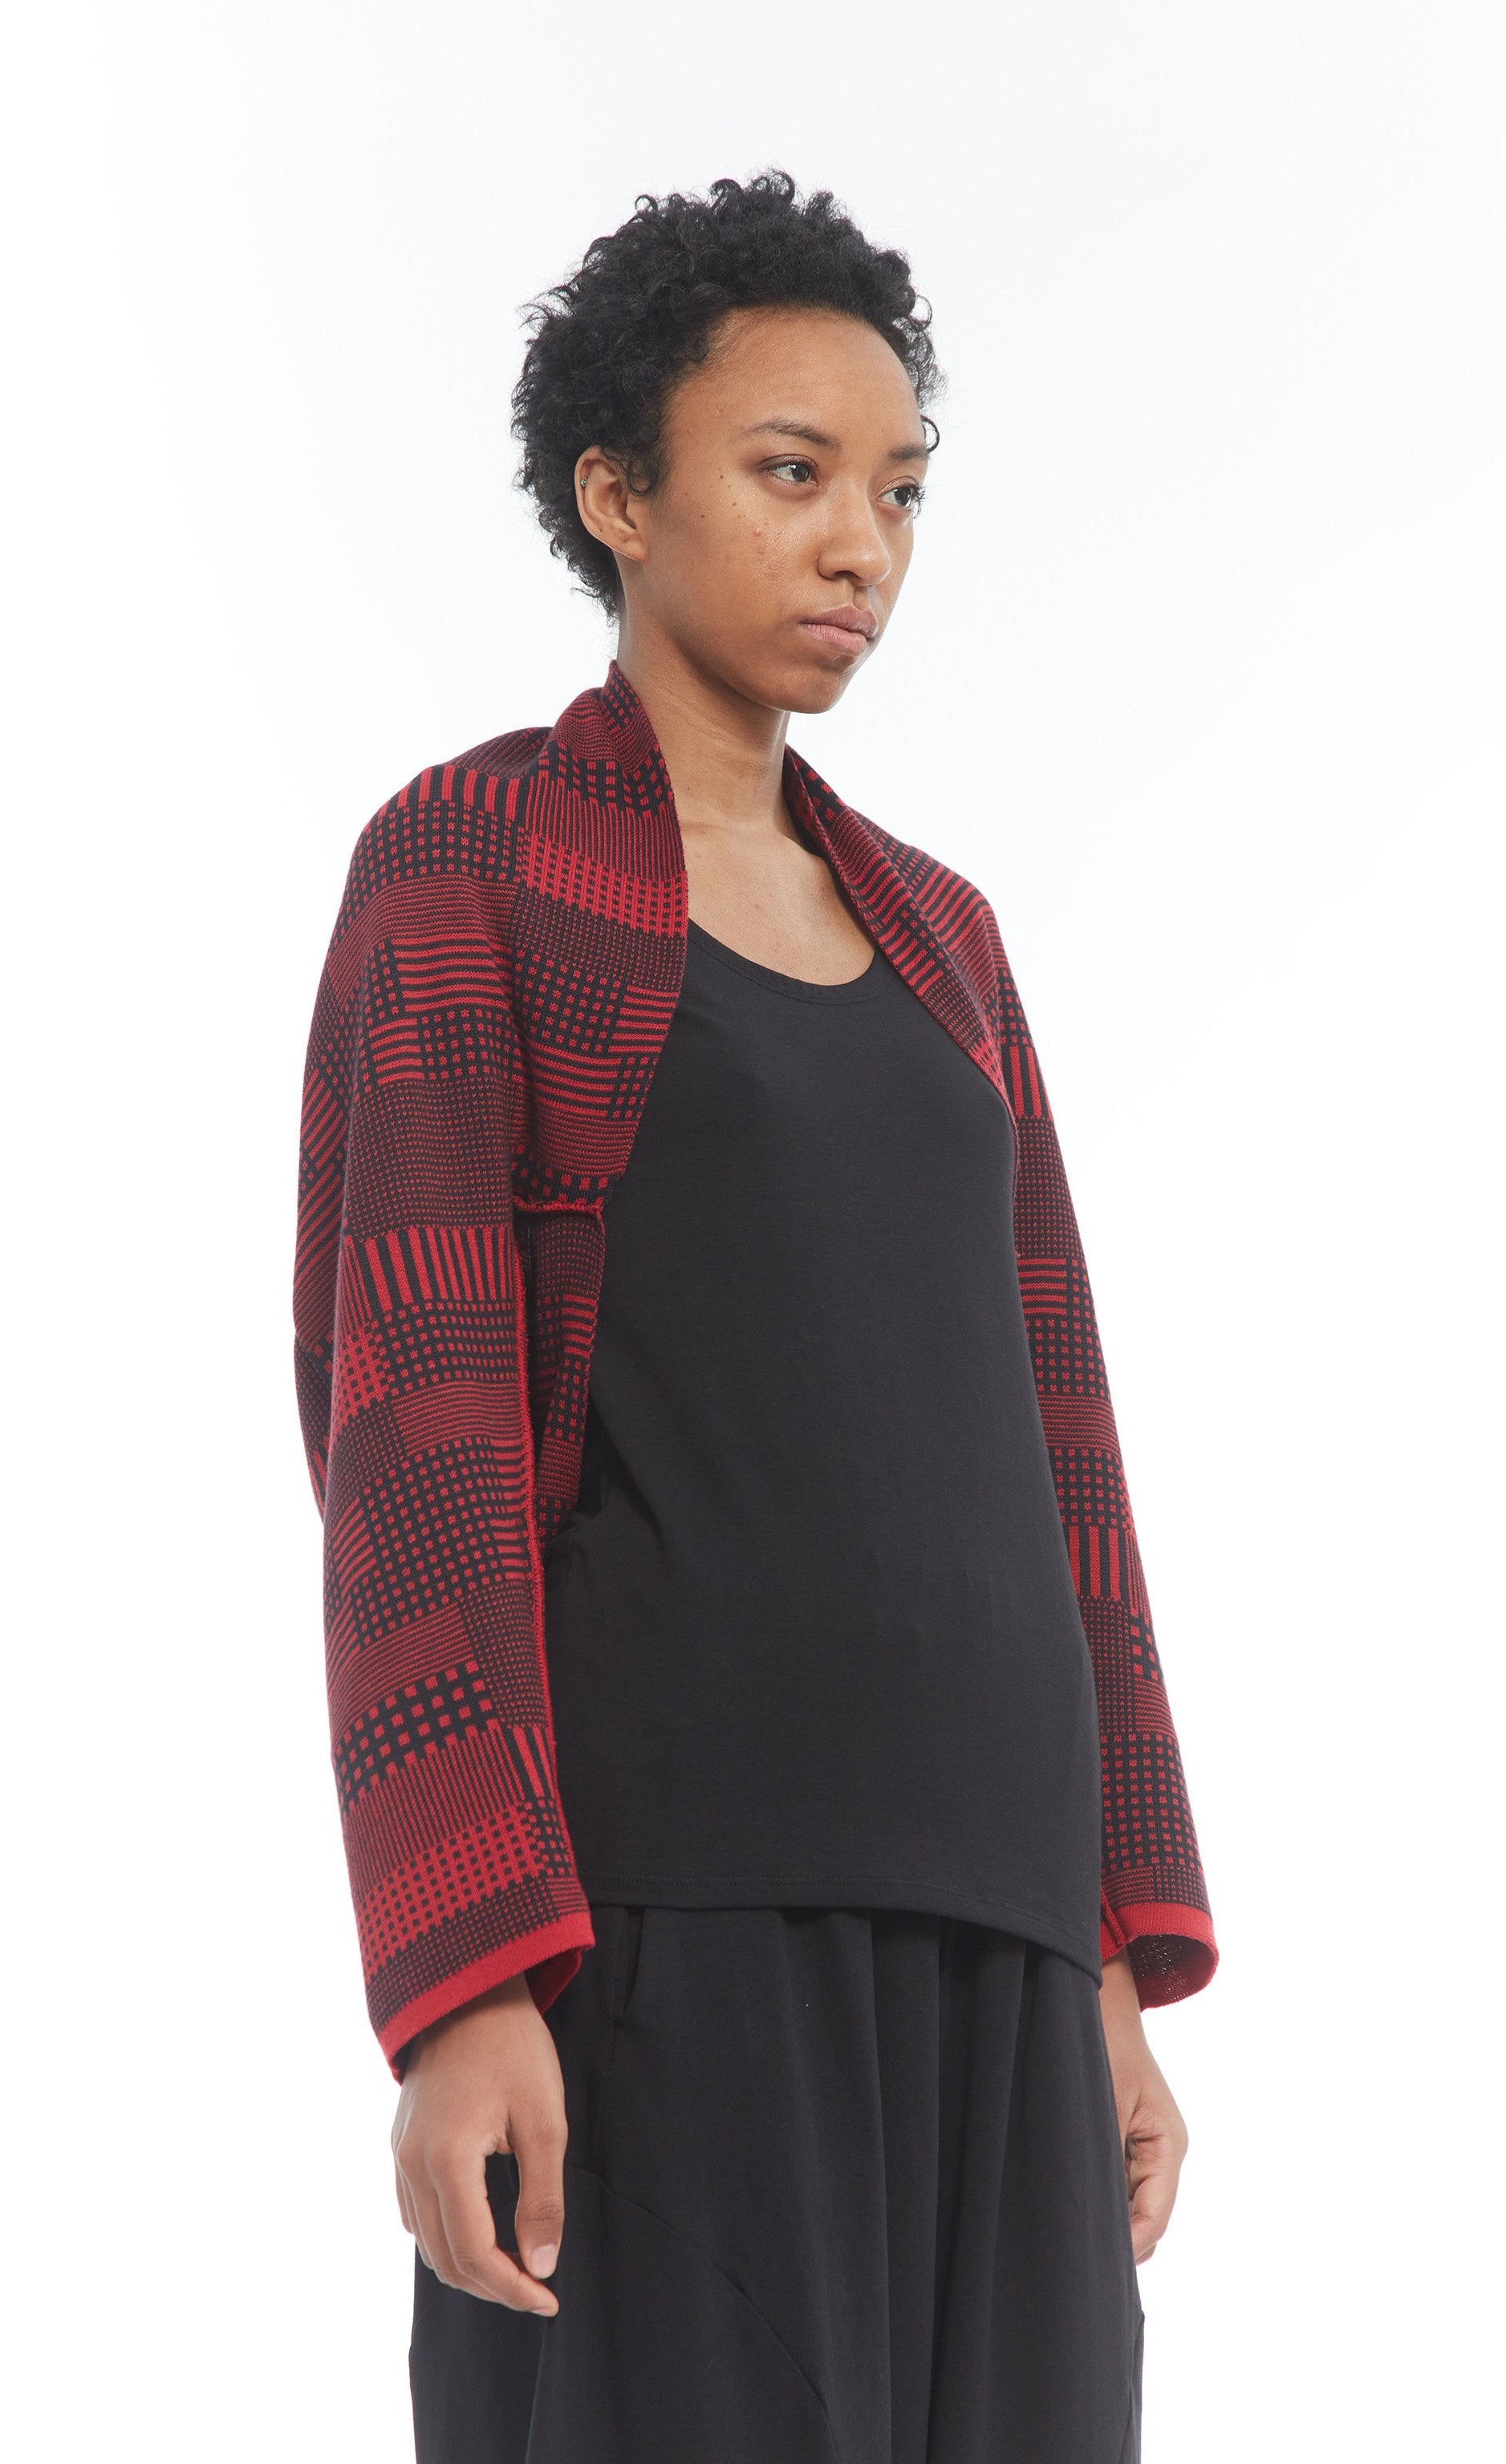 Front top half view of a woman wearing the mxmatthildur vonji sweater. This sweater is red and black plaid patchwork. The sweater has long sleeves and is being worn as a cropped shrug with a black tank.